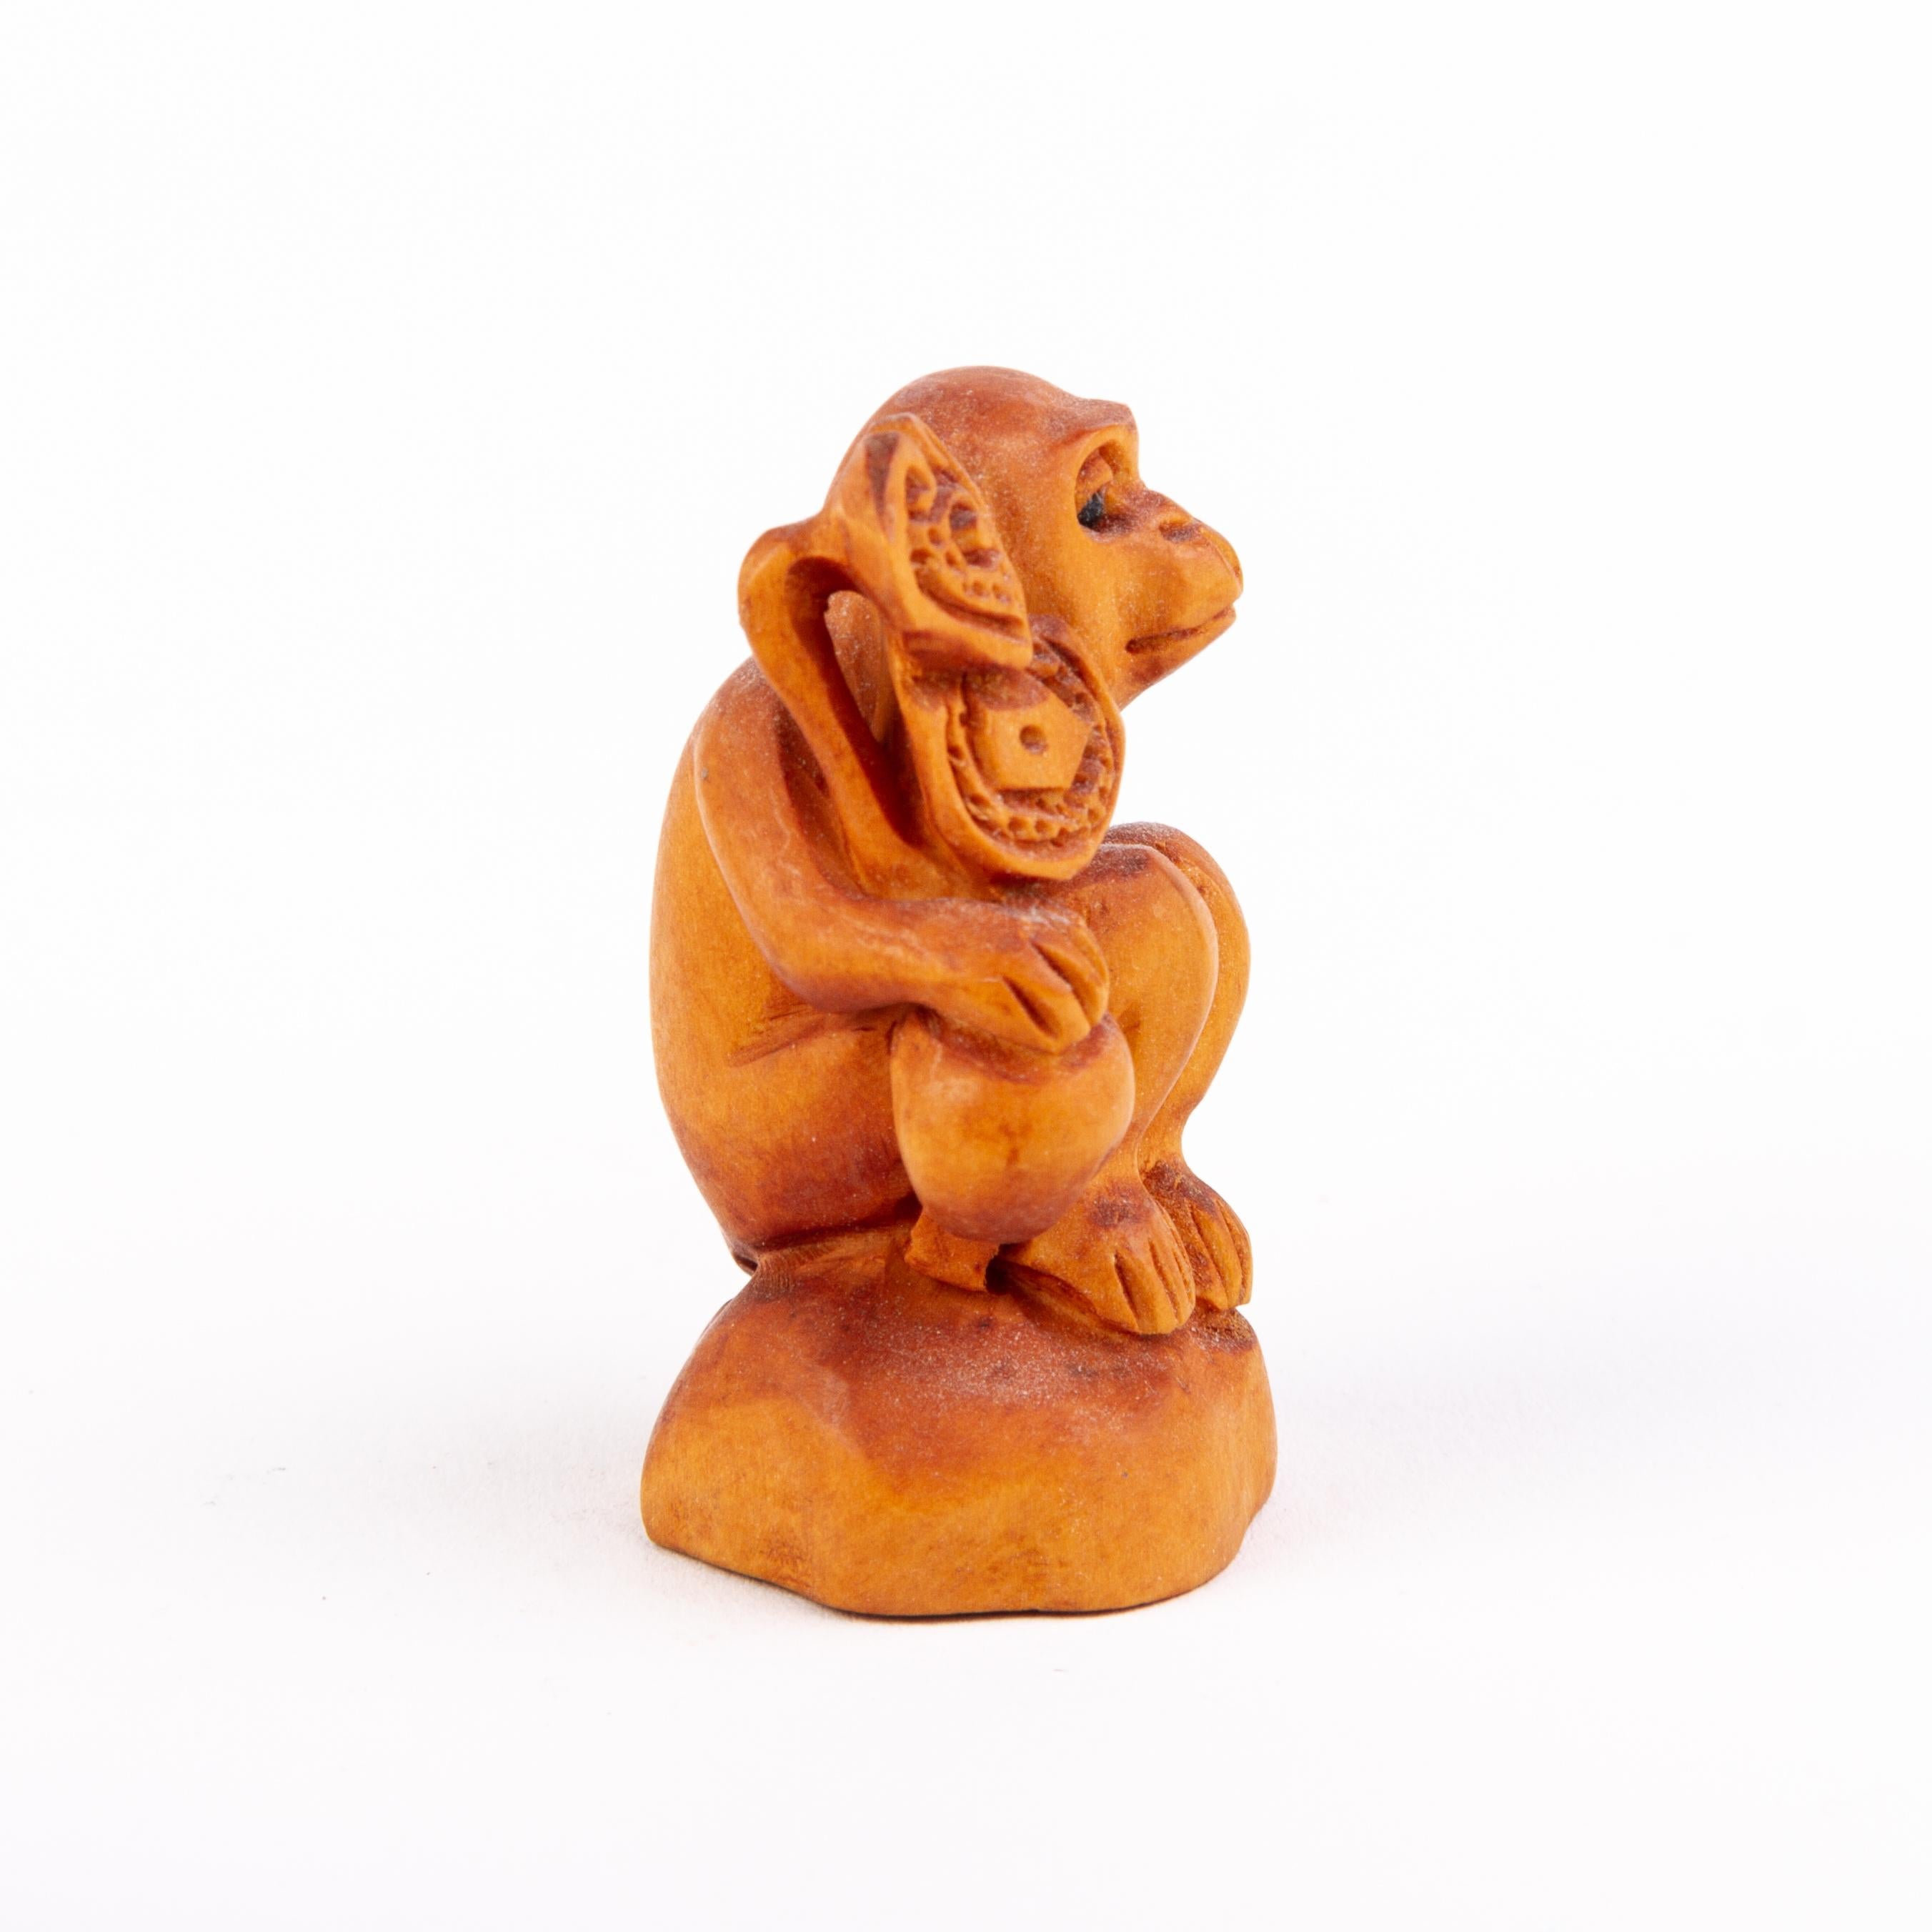 In good condition
From a private collection
Free international shipping
Signed Japanese Boxwood Netsuke Inro of a Monkey